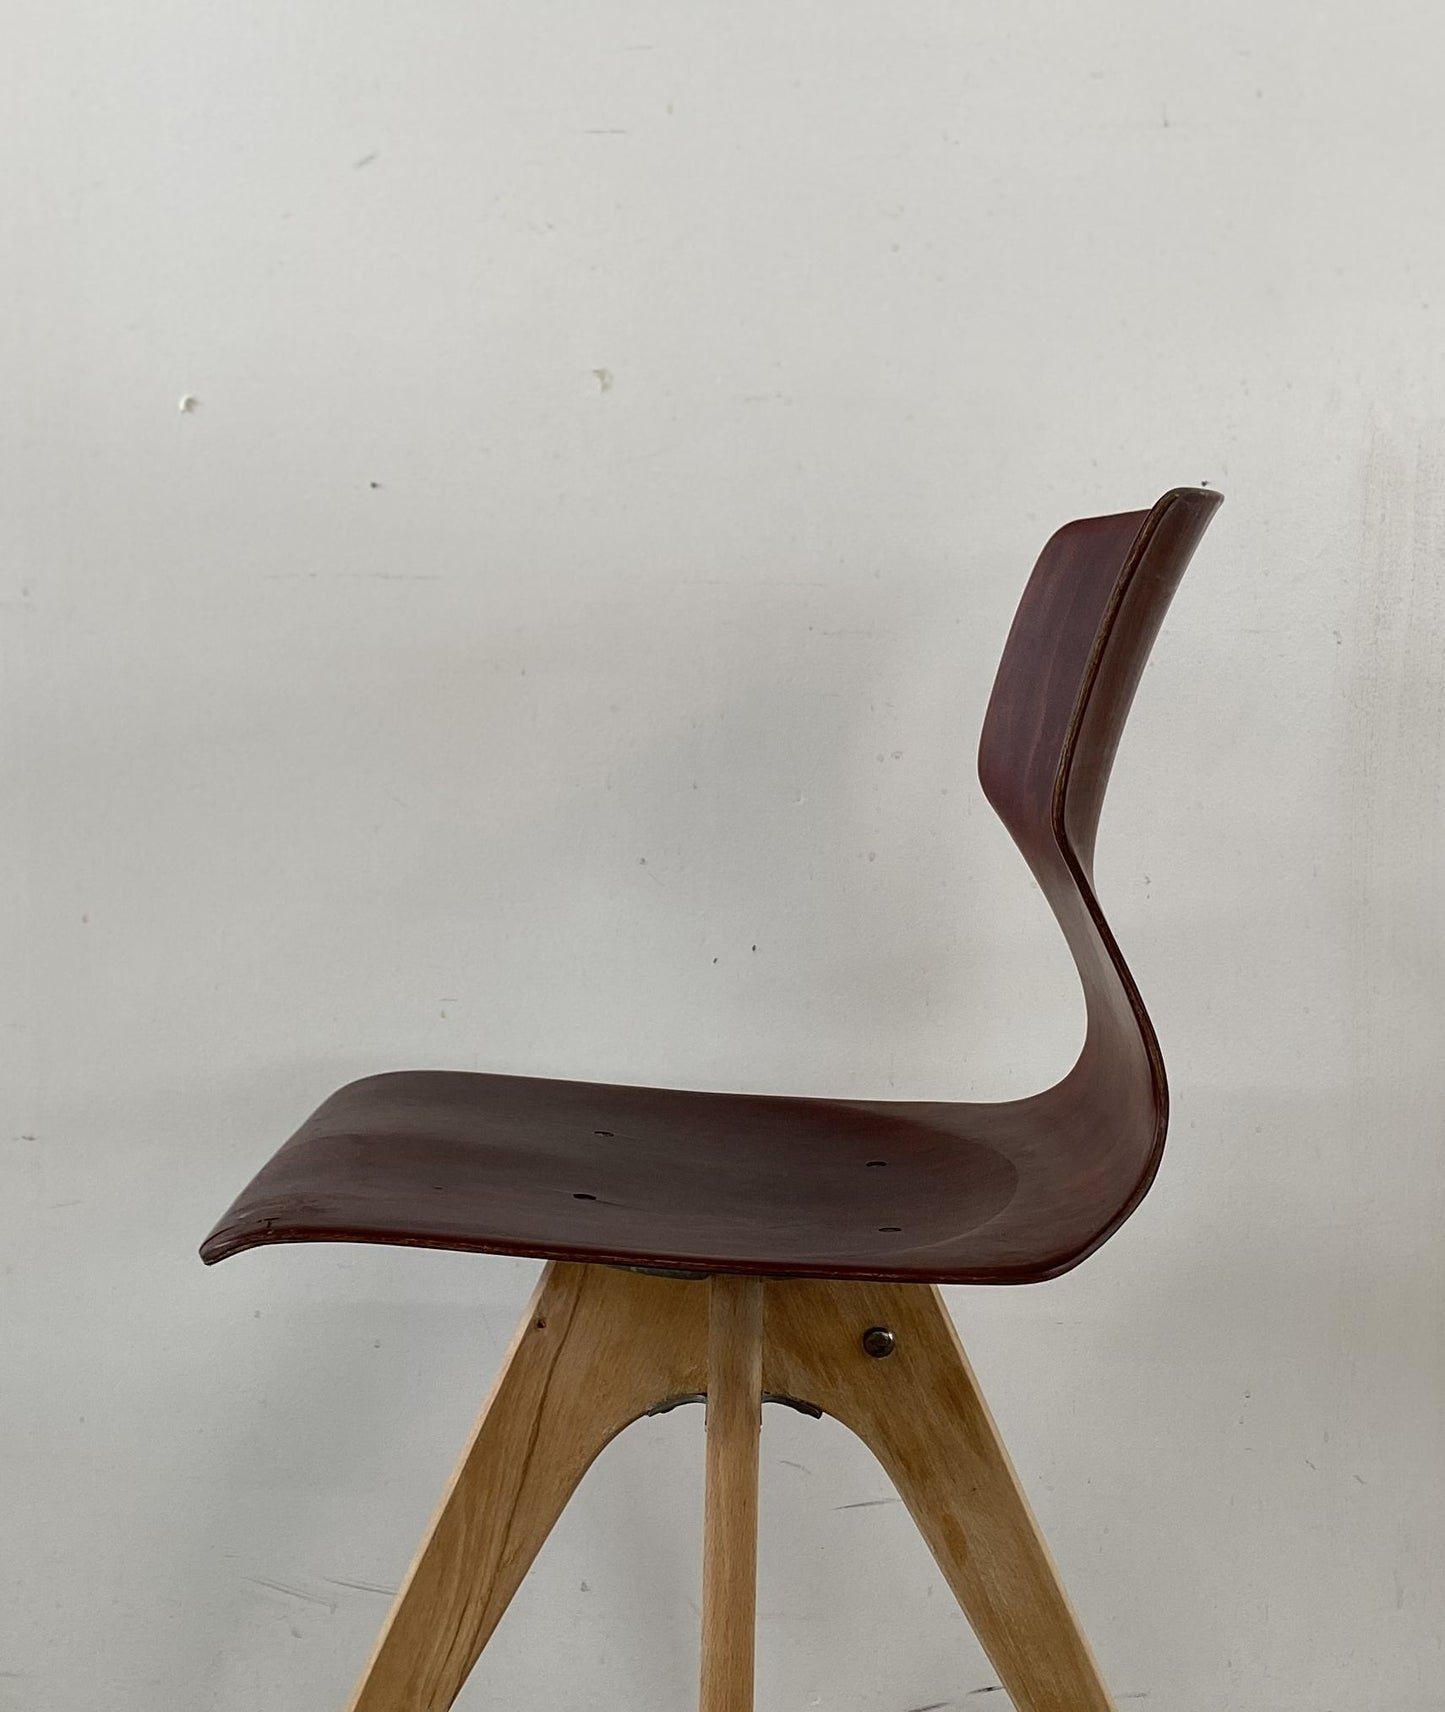 Vintage Ply wood Chair "FPF FLOTOTTO"